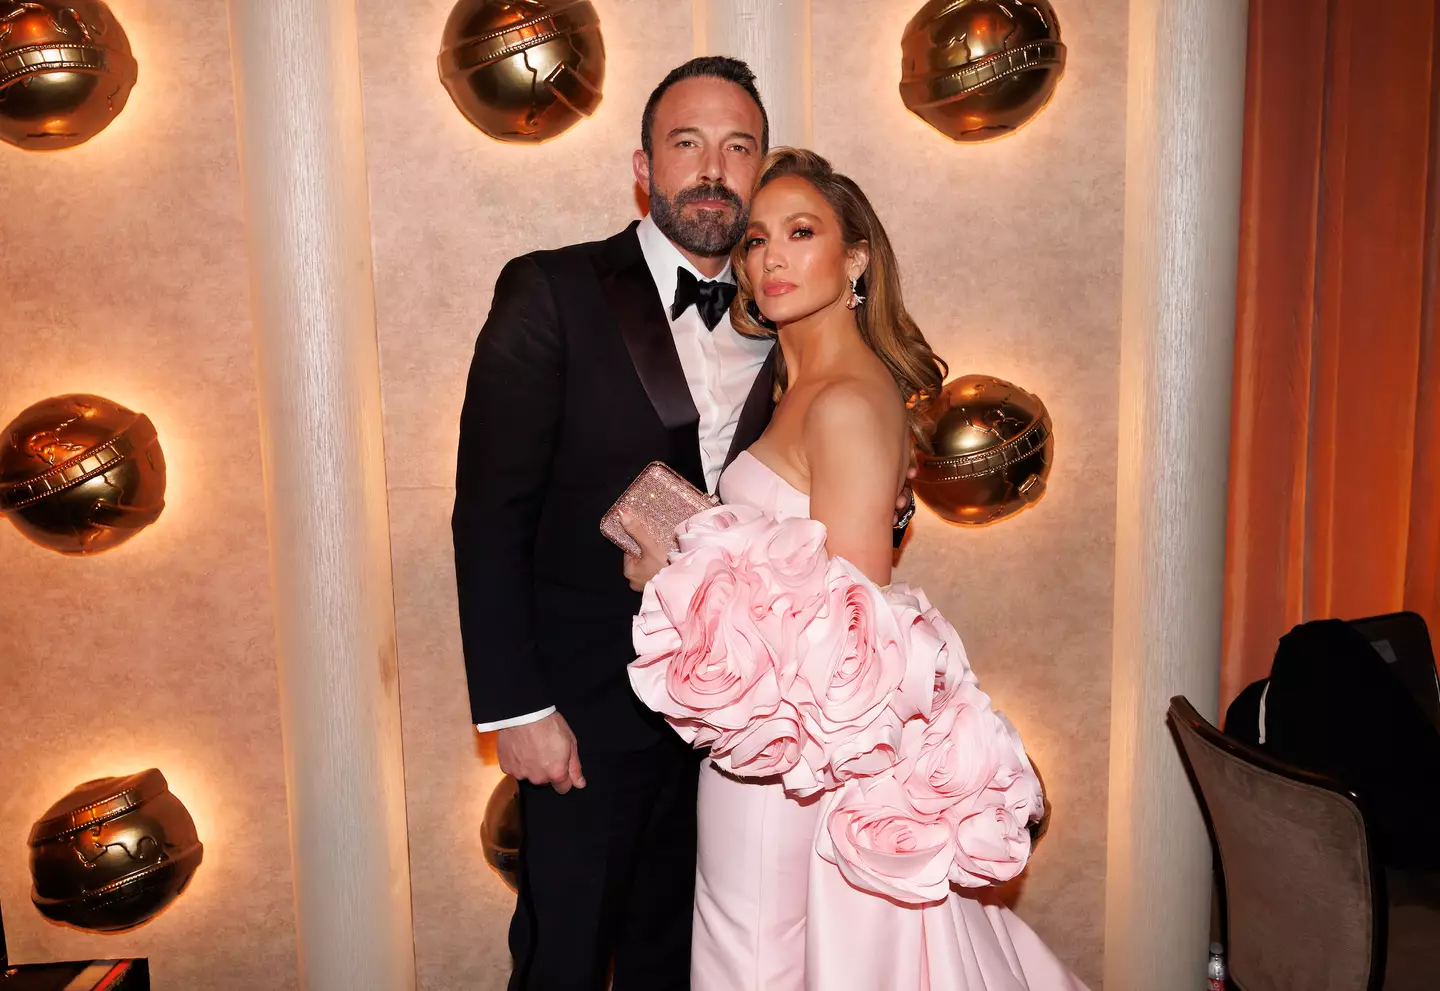 Affleck’s wife Jennifer Lopez has recently addressed the concern surrounding her husband.